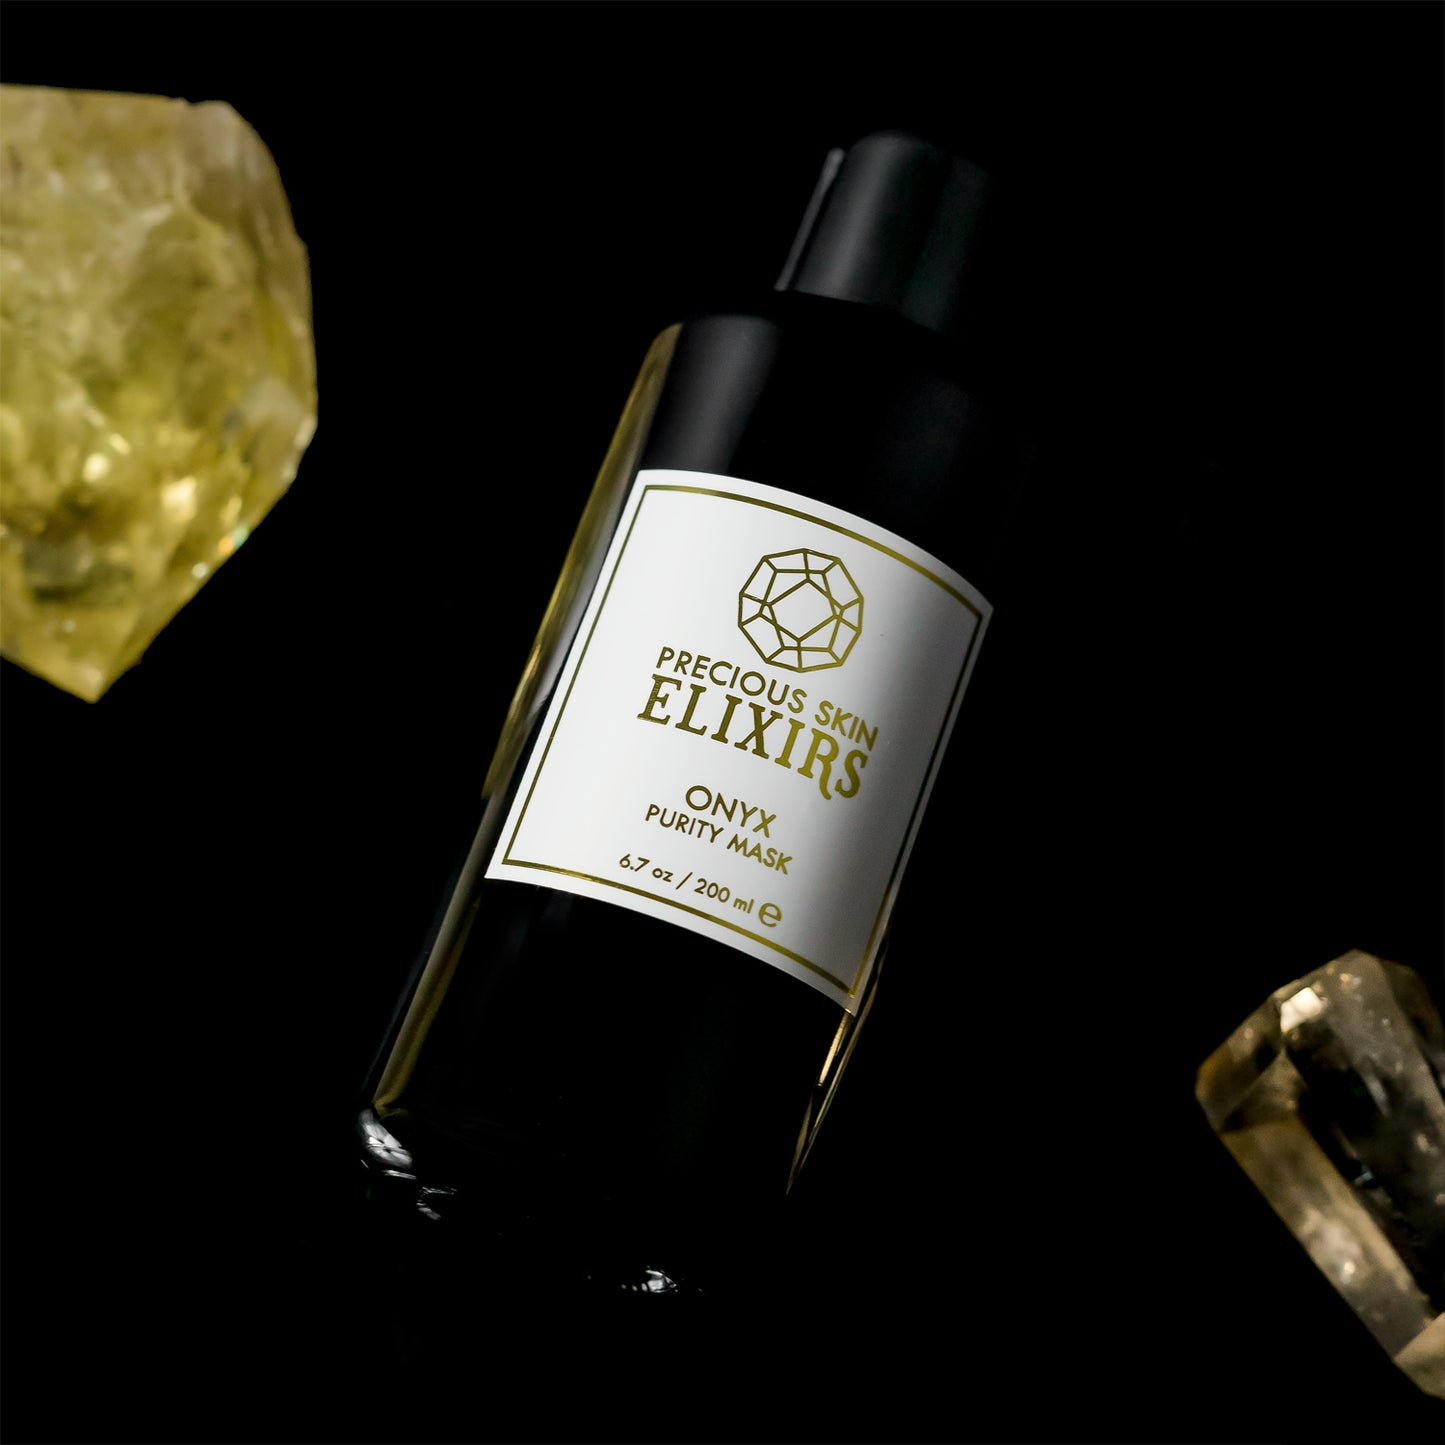 Black glass bottle filled with organic face mask powder, chocolate and spaices, rests next to crystals on a black table